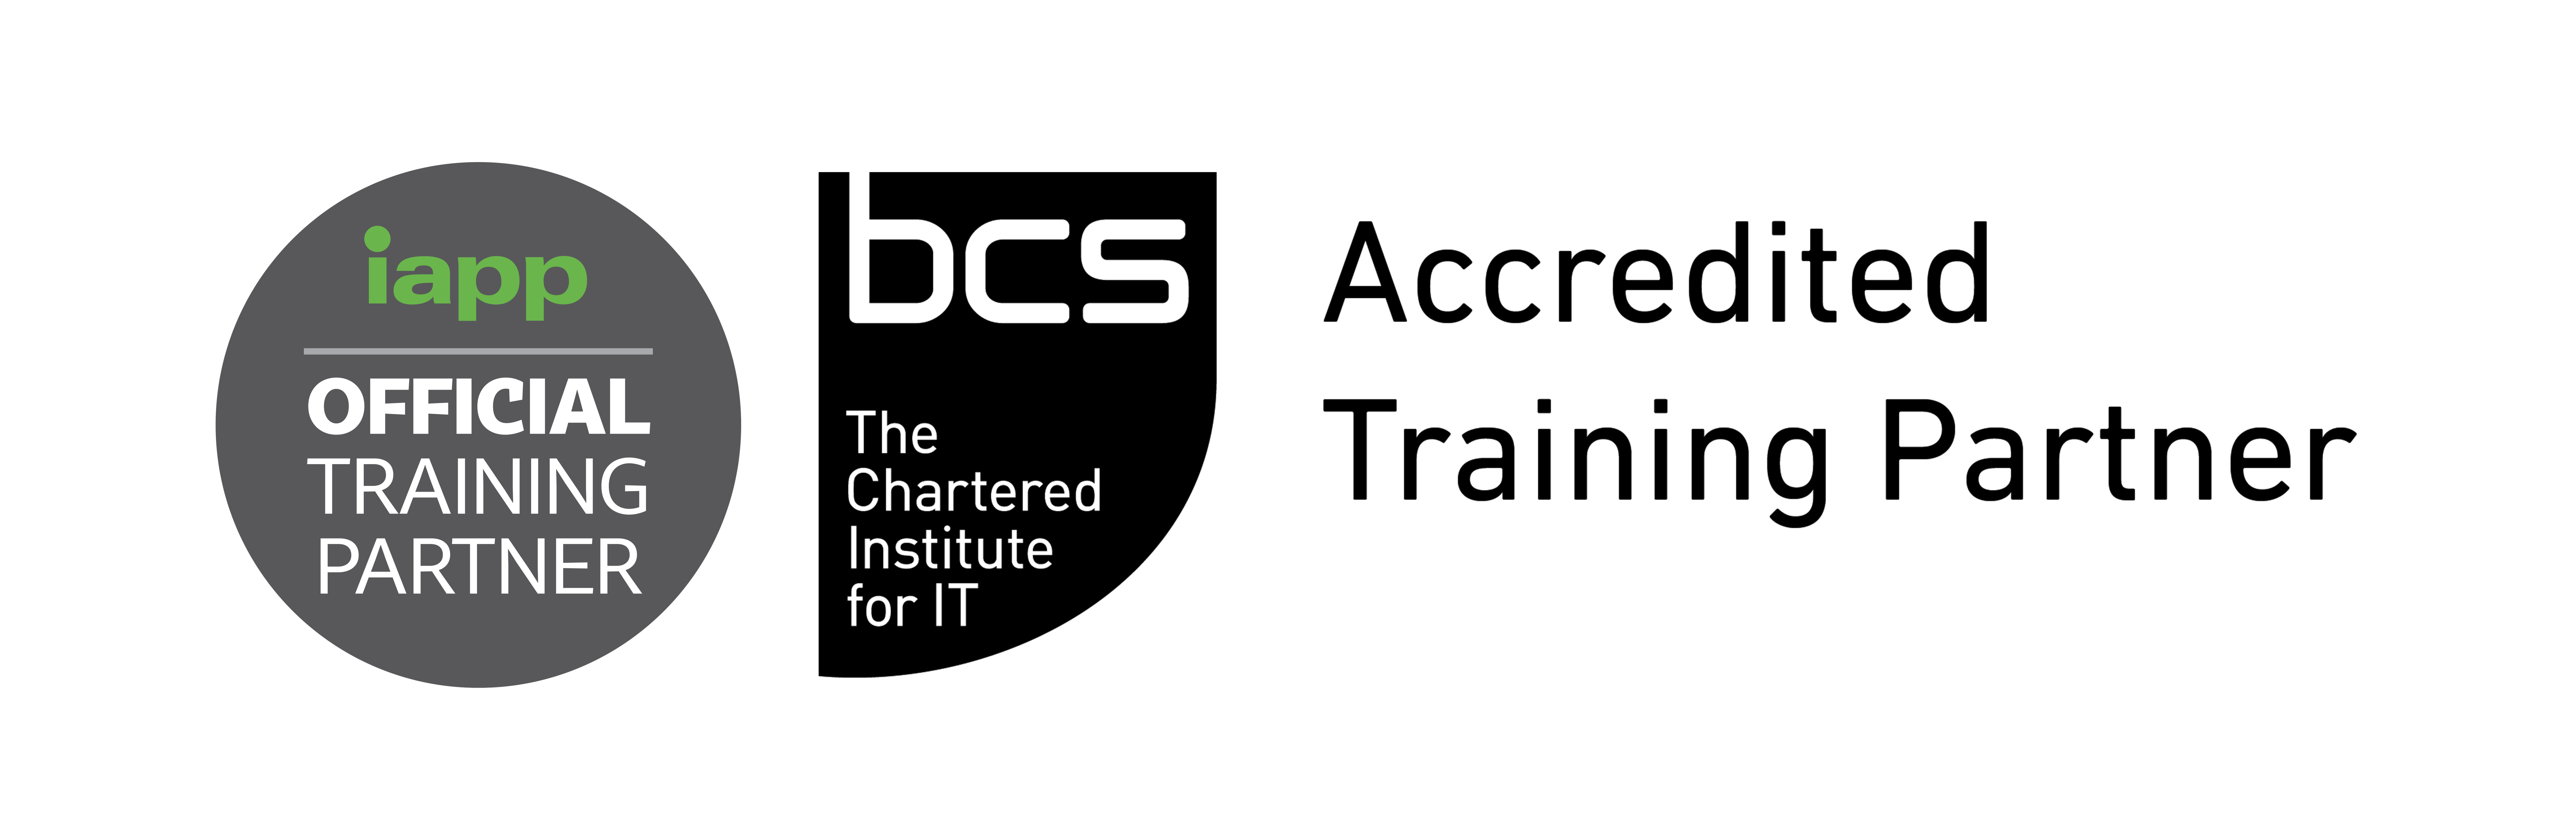 IAPP and BCS Accredited Training Partners 